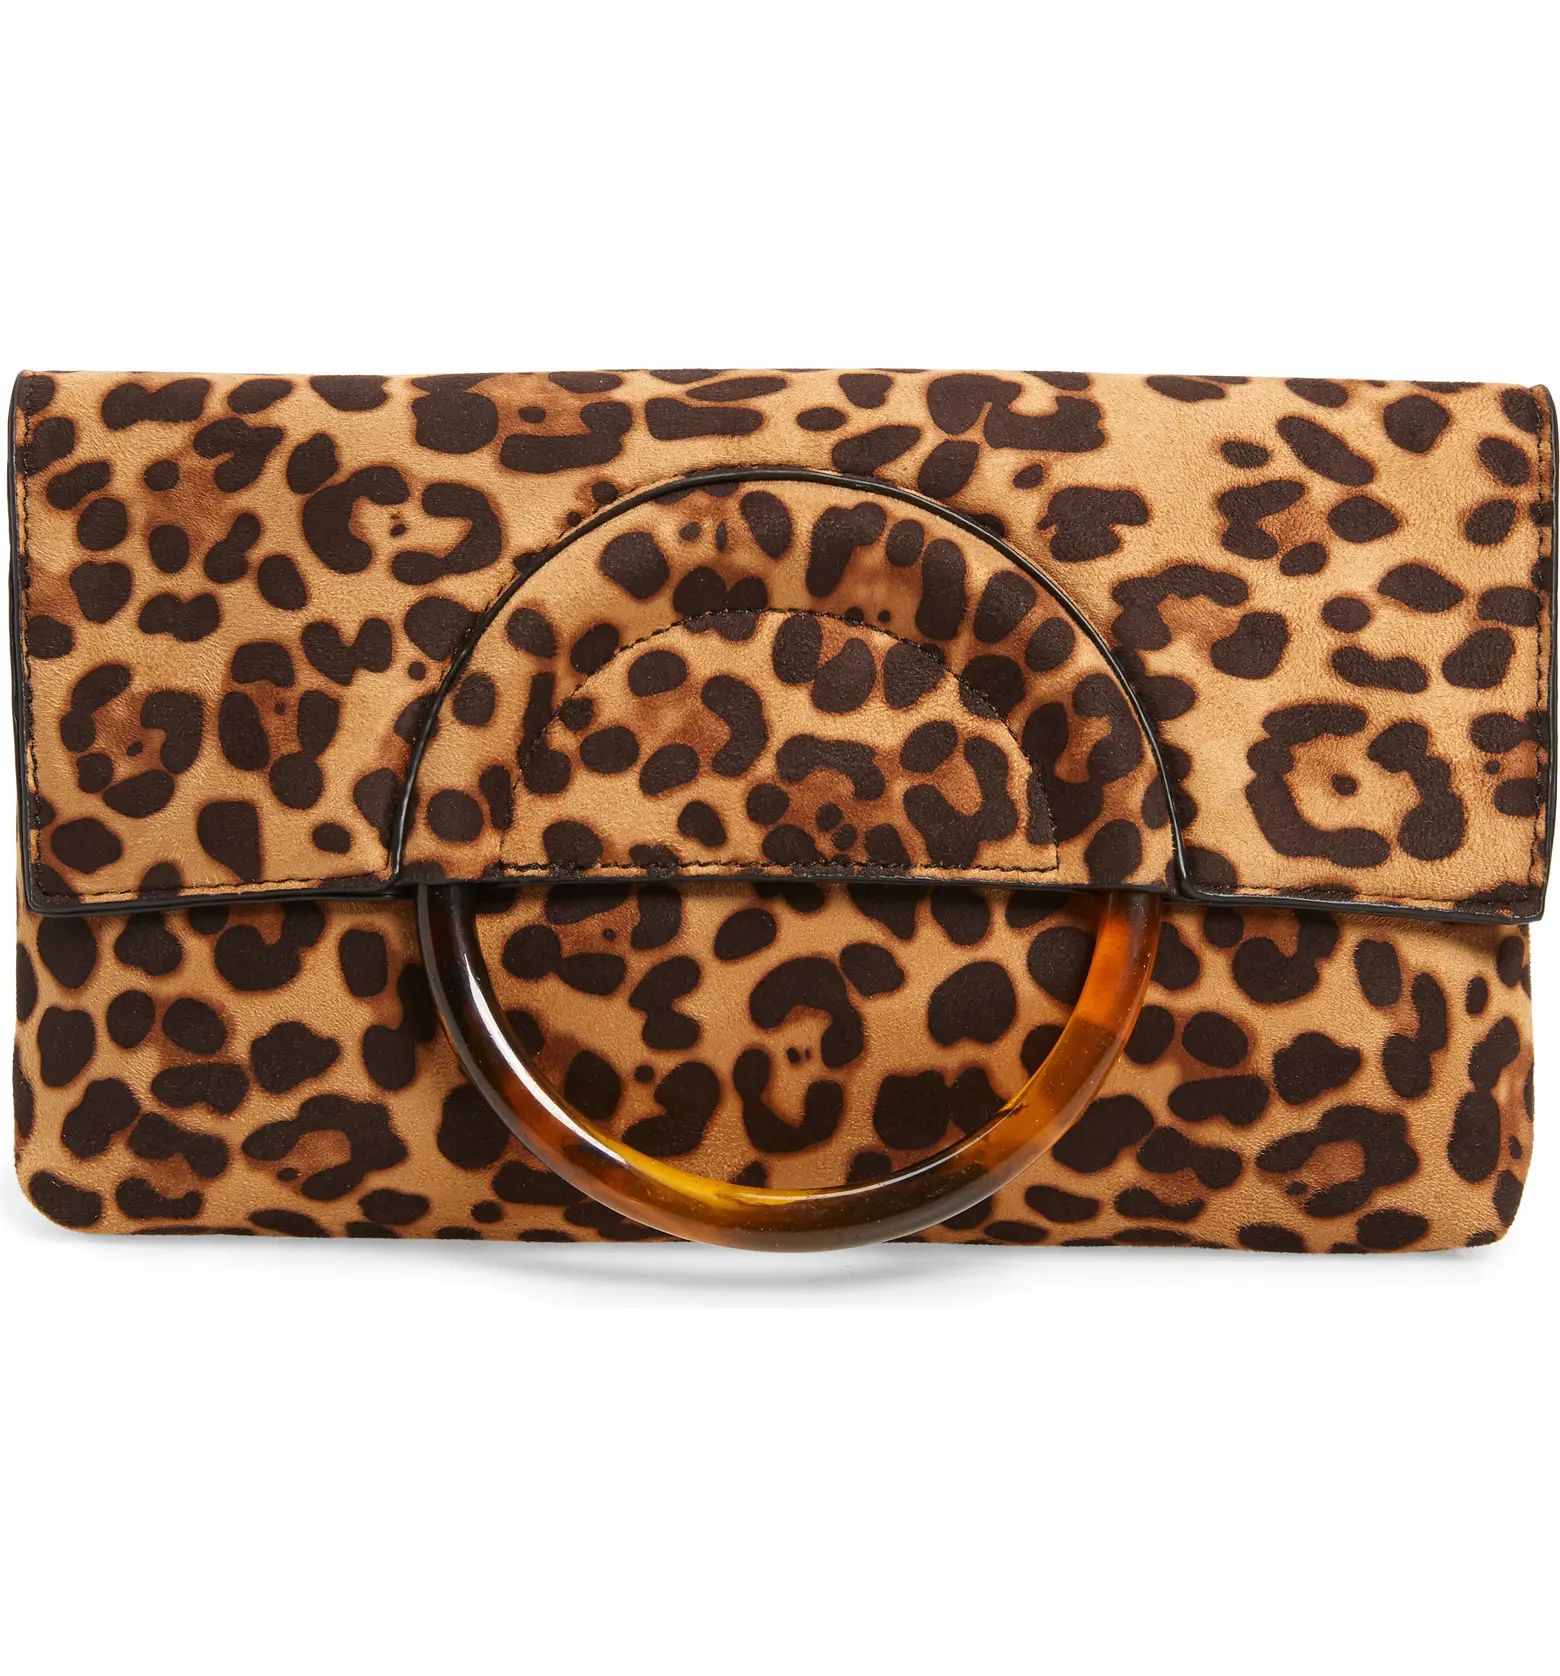 Ring Handle Classic Clutch | Nordstrom